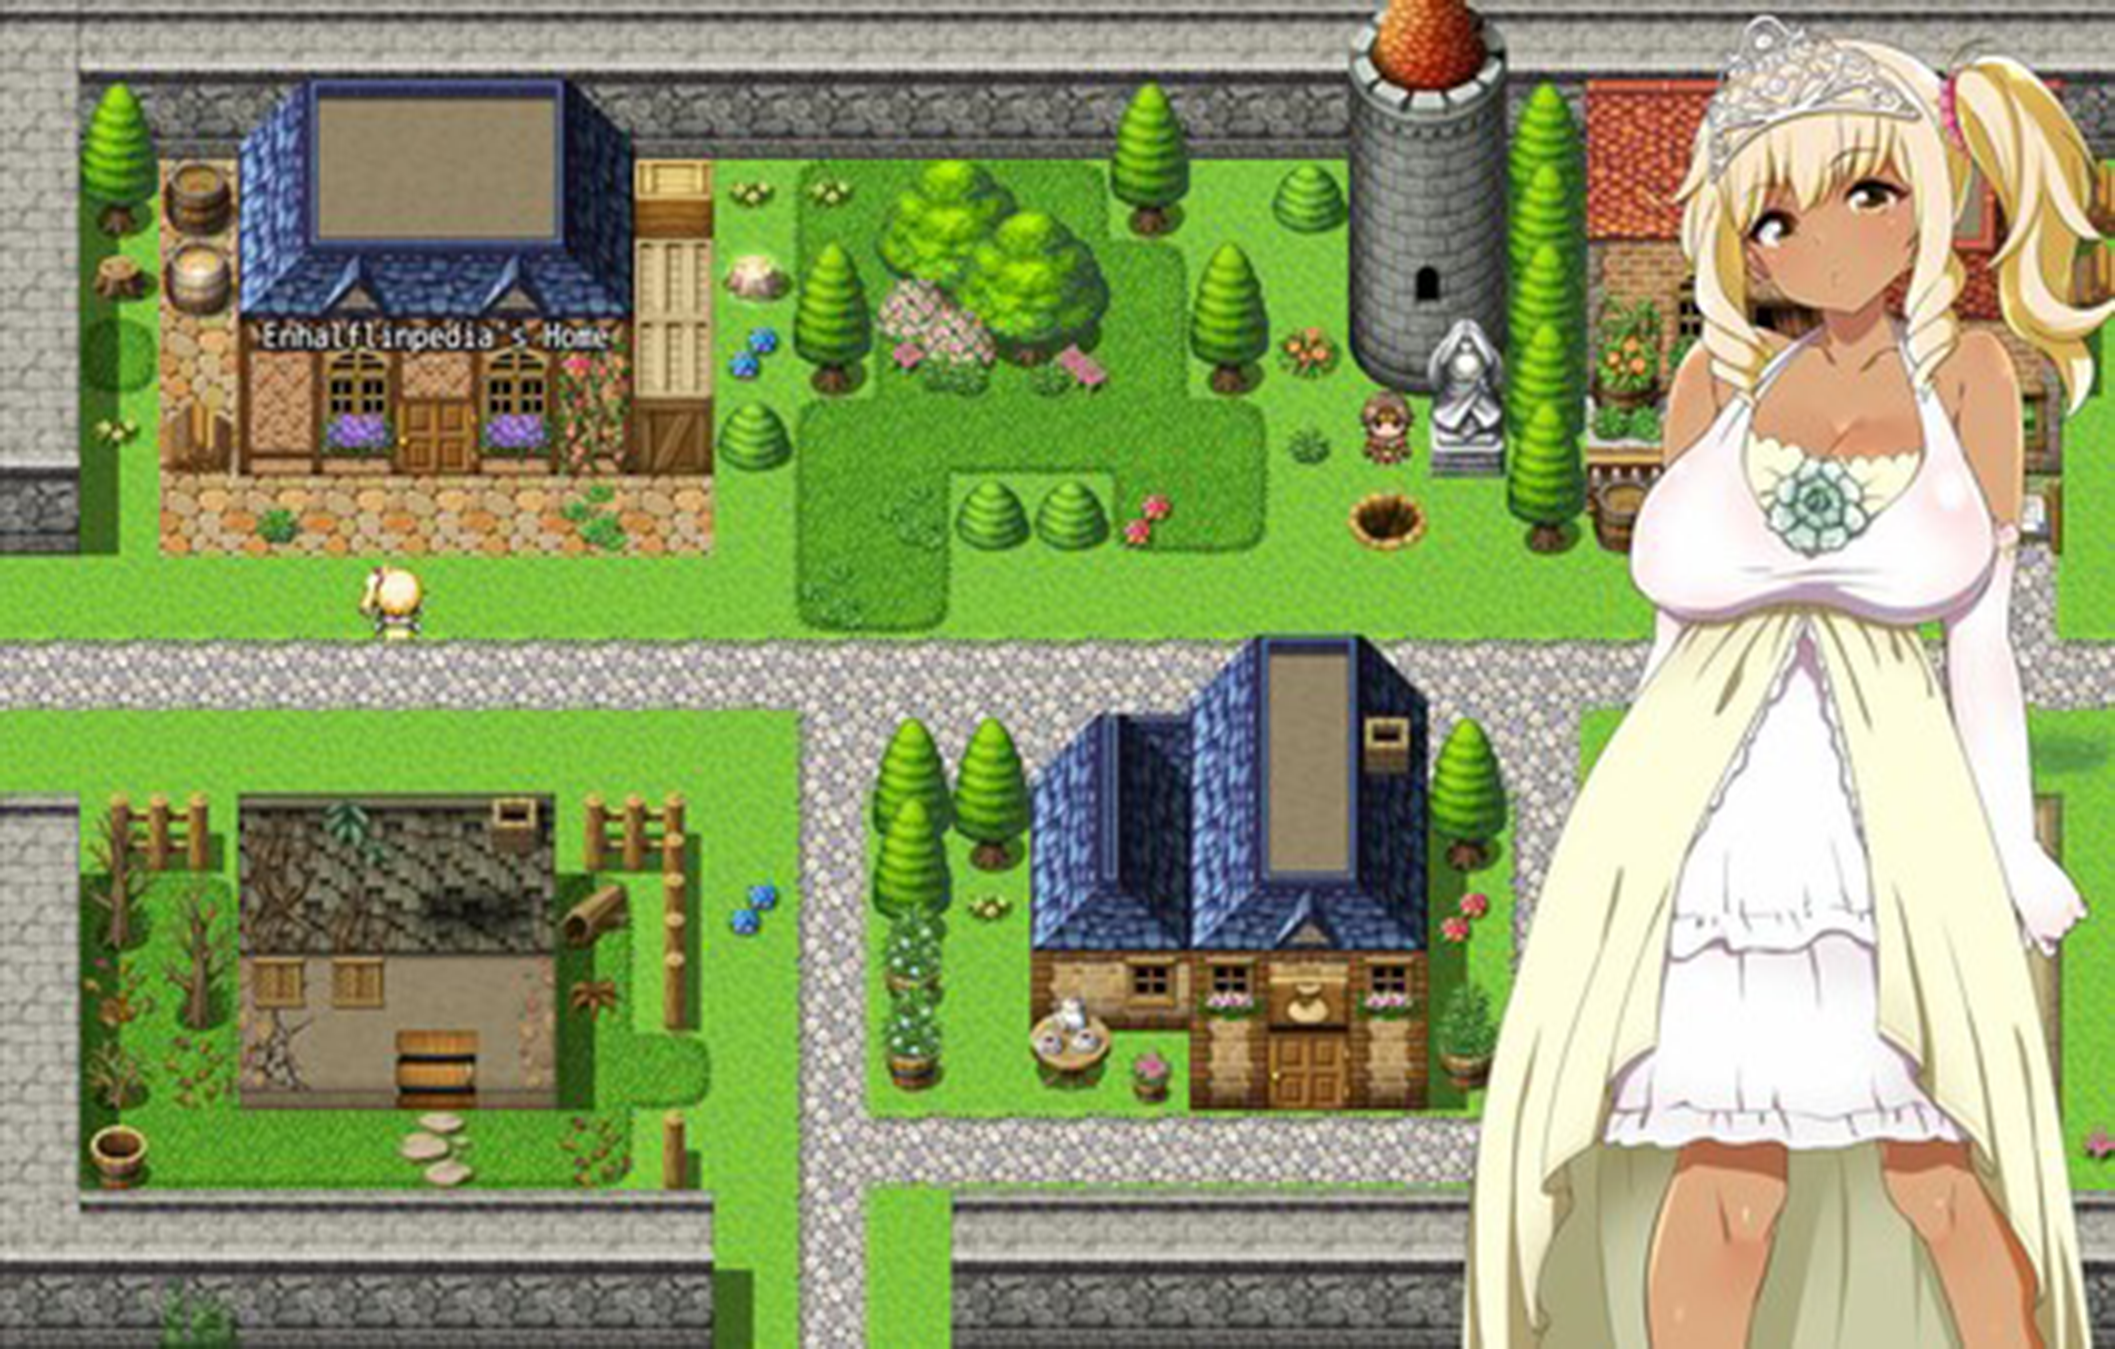 Rpg games play. Melty’s Quest игра. Meltys Quest костюмы. Meltys Quest [Happy Life] (квест Мелтис). Meltys Quest RPG.